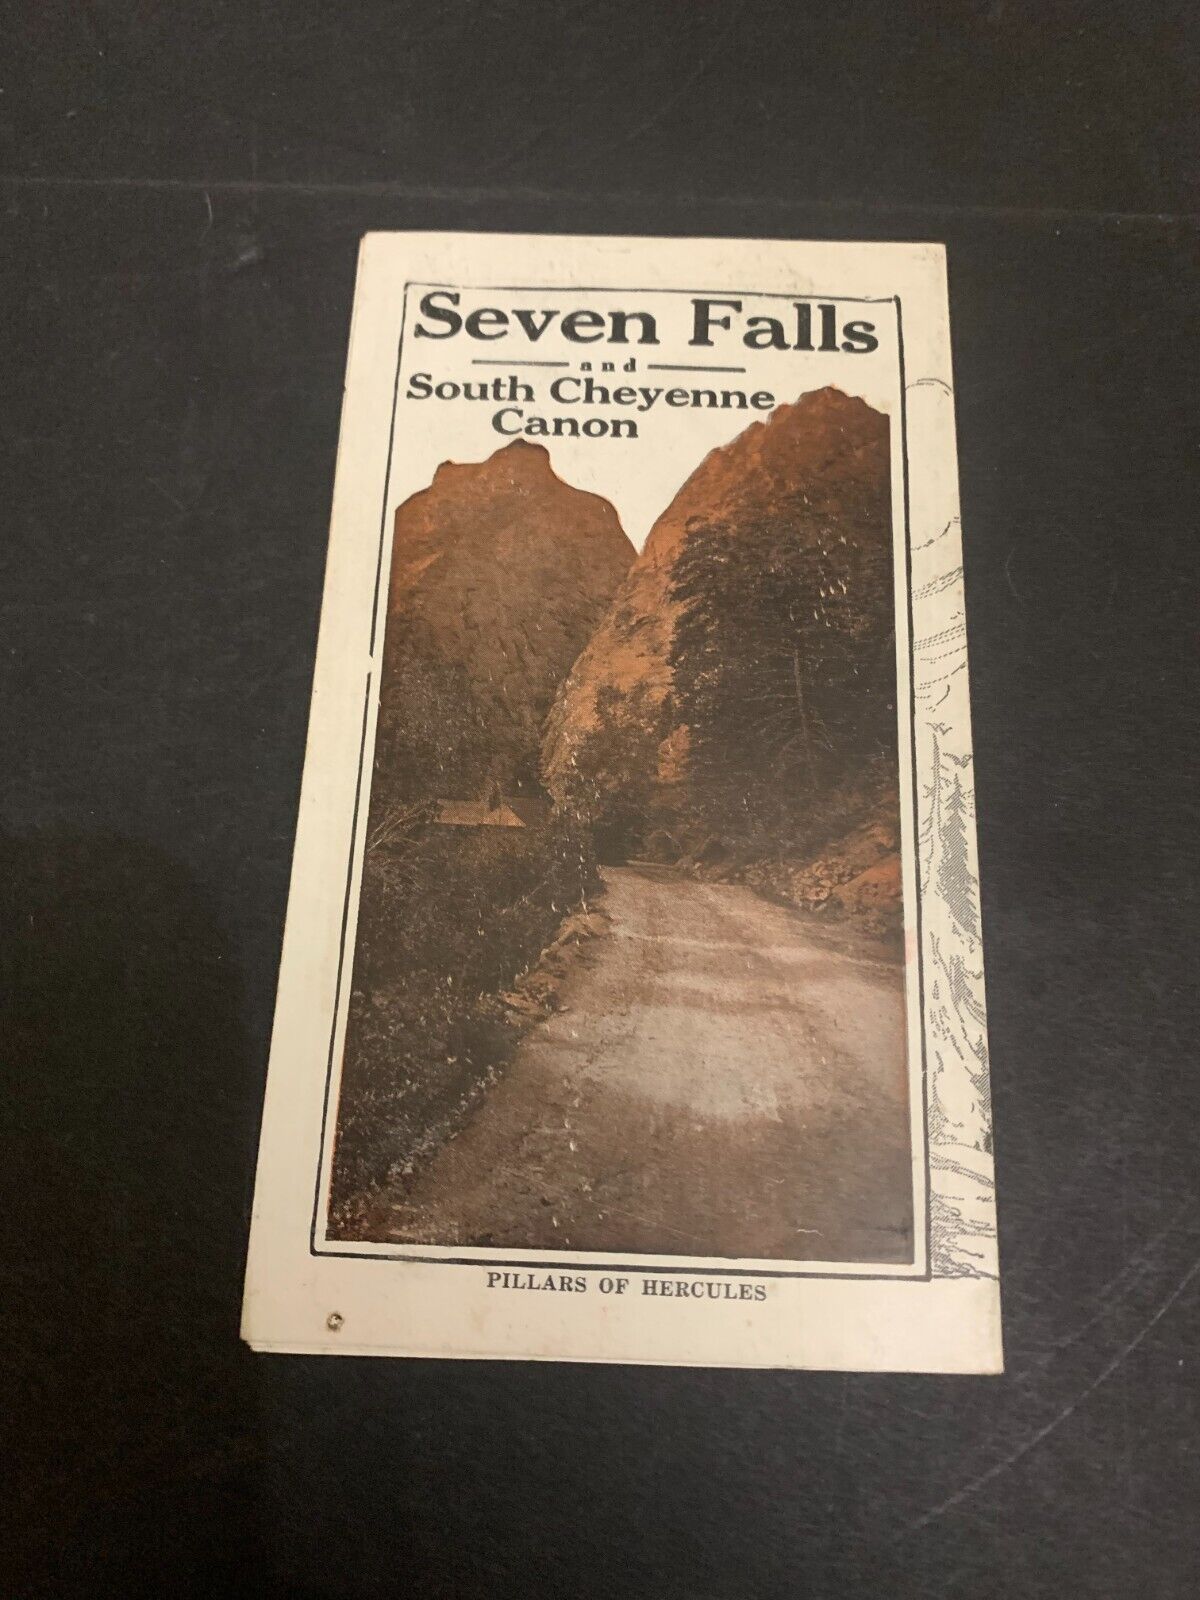 Vintage c.1930's Seven Falls and South Cheyenne Canyon Colorado Travel Brochure